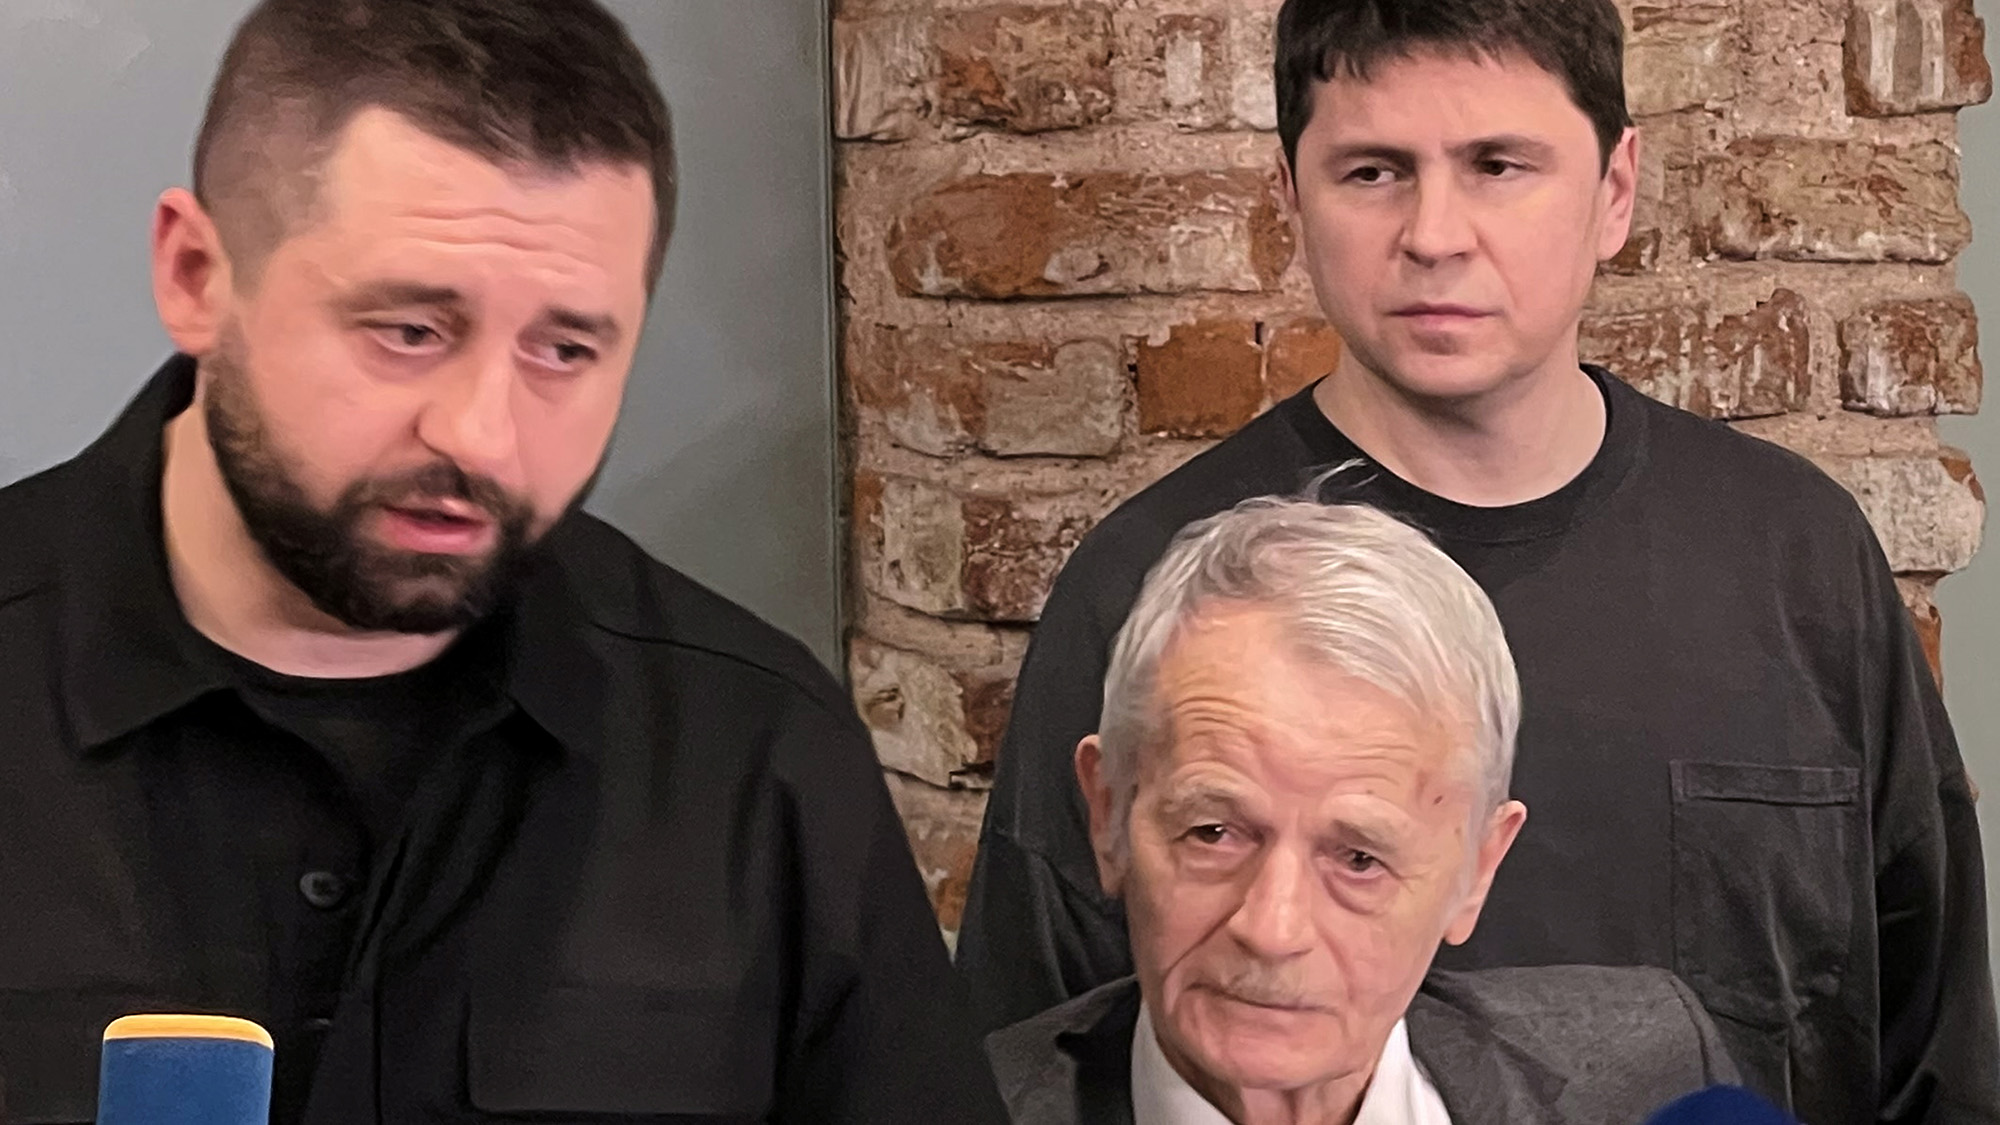 David Arakhamia, left, Mykhailo Podolyak, center and Crimean Tatar leader Mustafa Dzhemilev speak with the media after their meeting with Russian negotiators in Istanbul, Turkey on March 29.